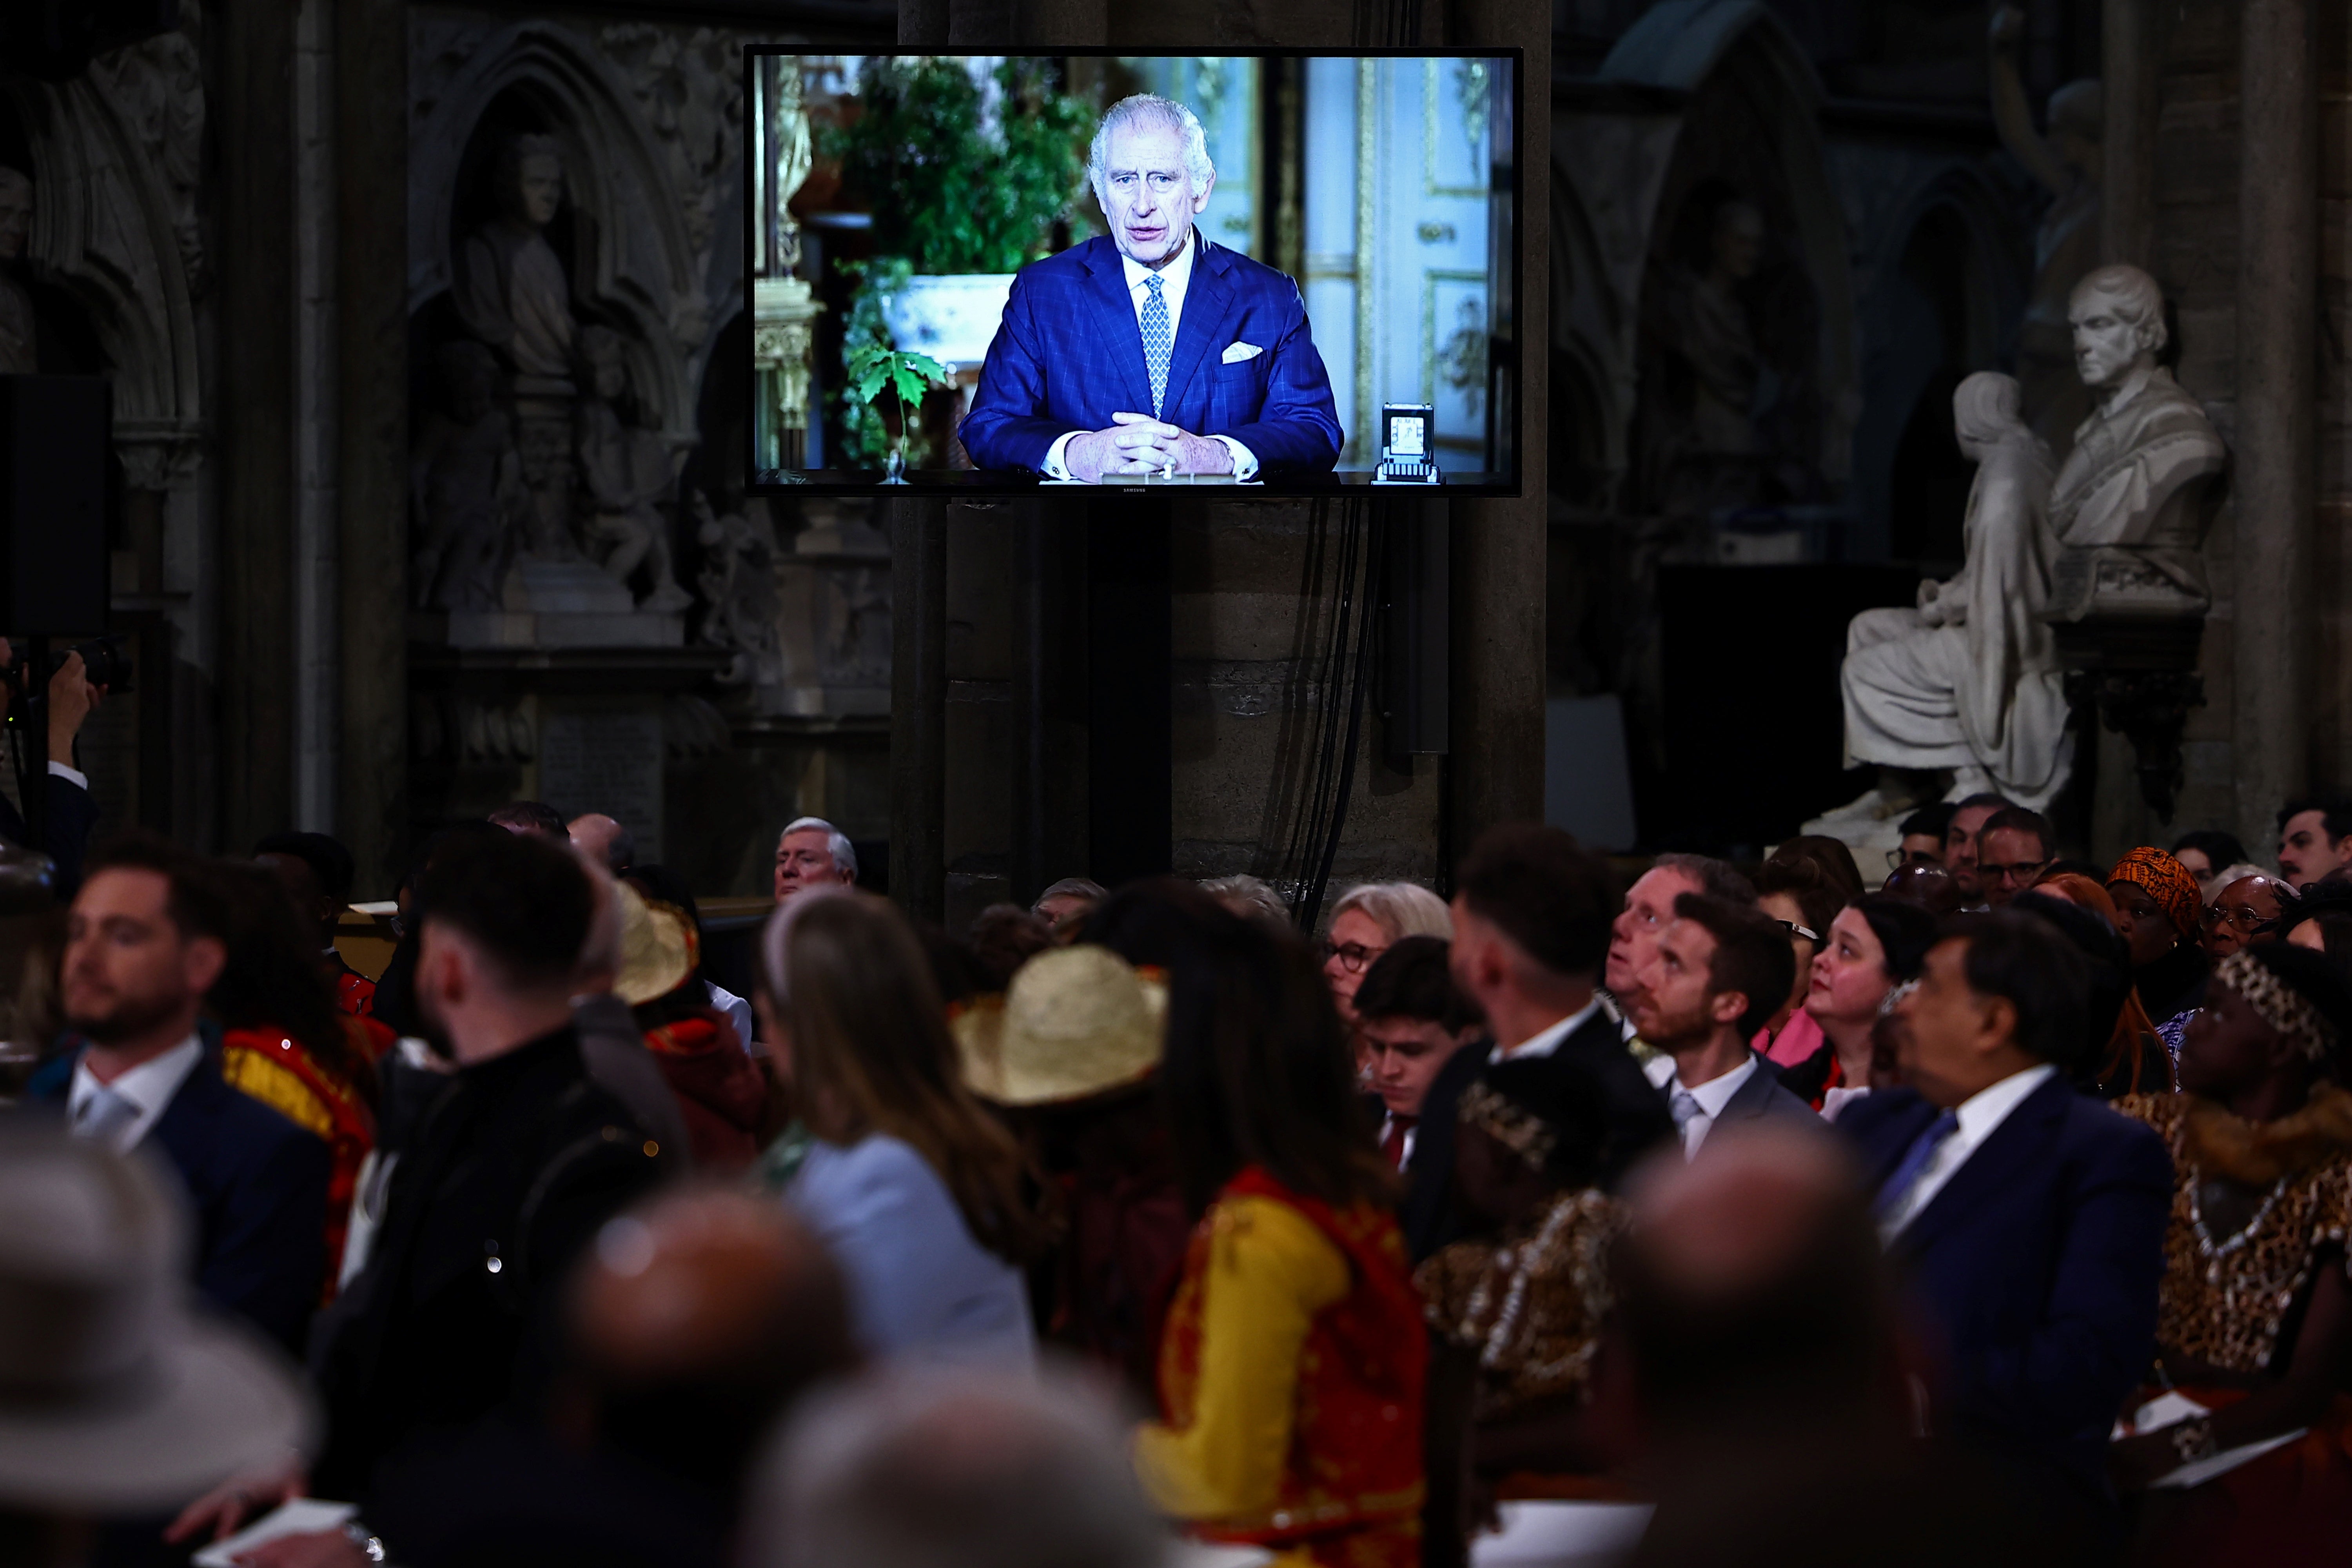 Guests watch a video of King Charles delivering a message during the annual Commonwealth Day Service at Westminster Abbey in London on Monday